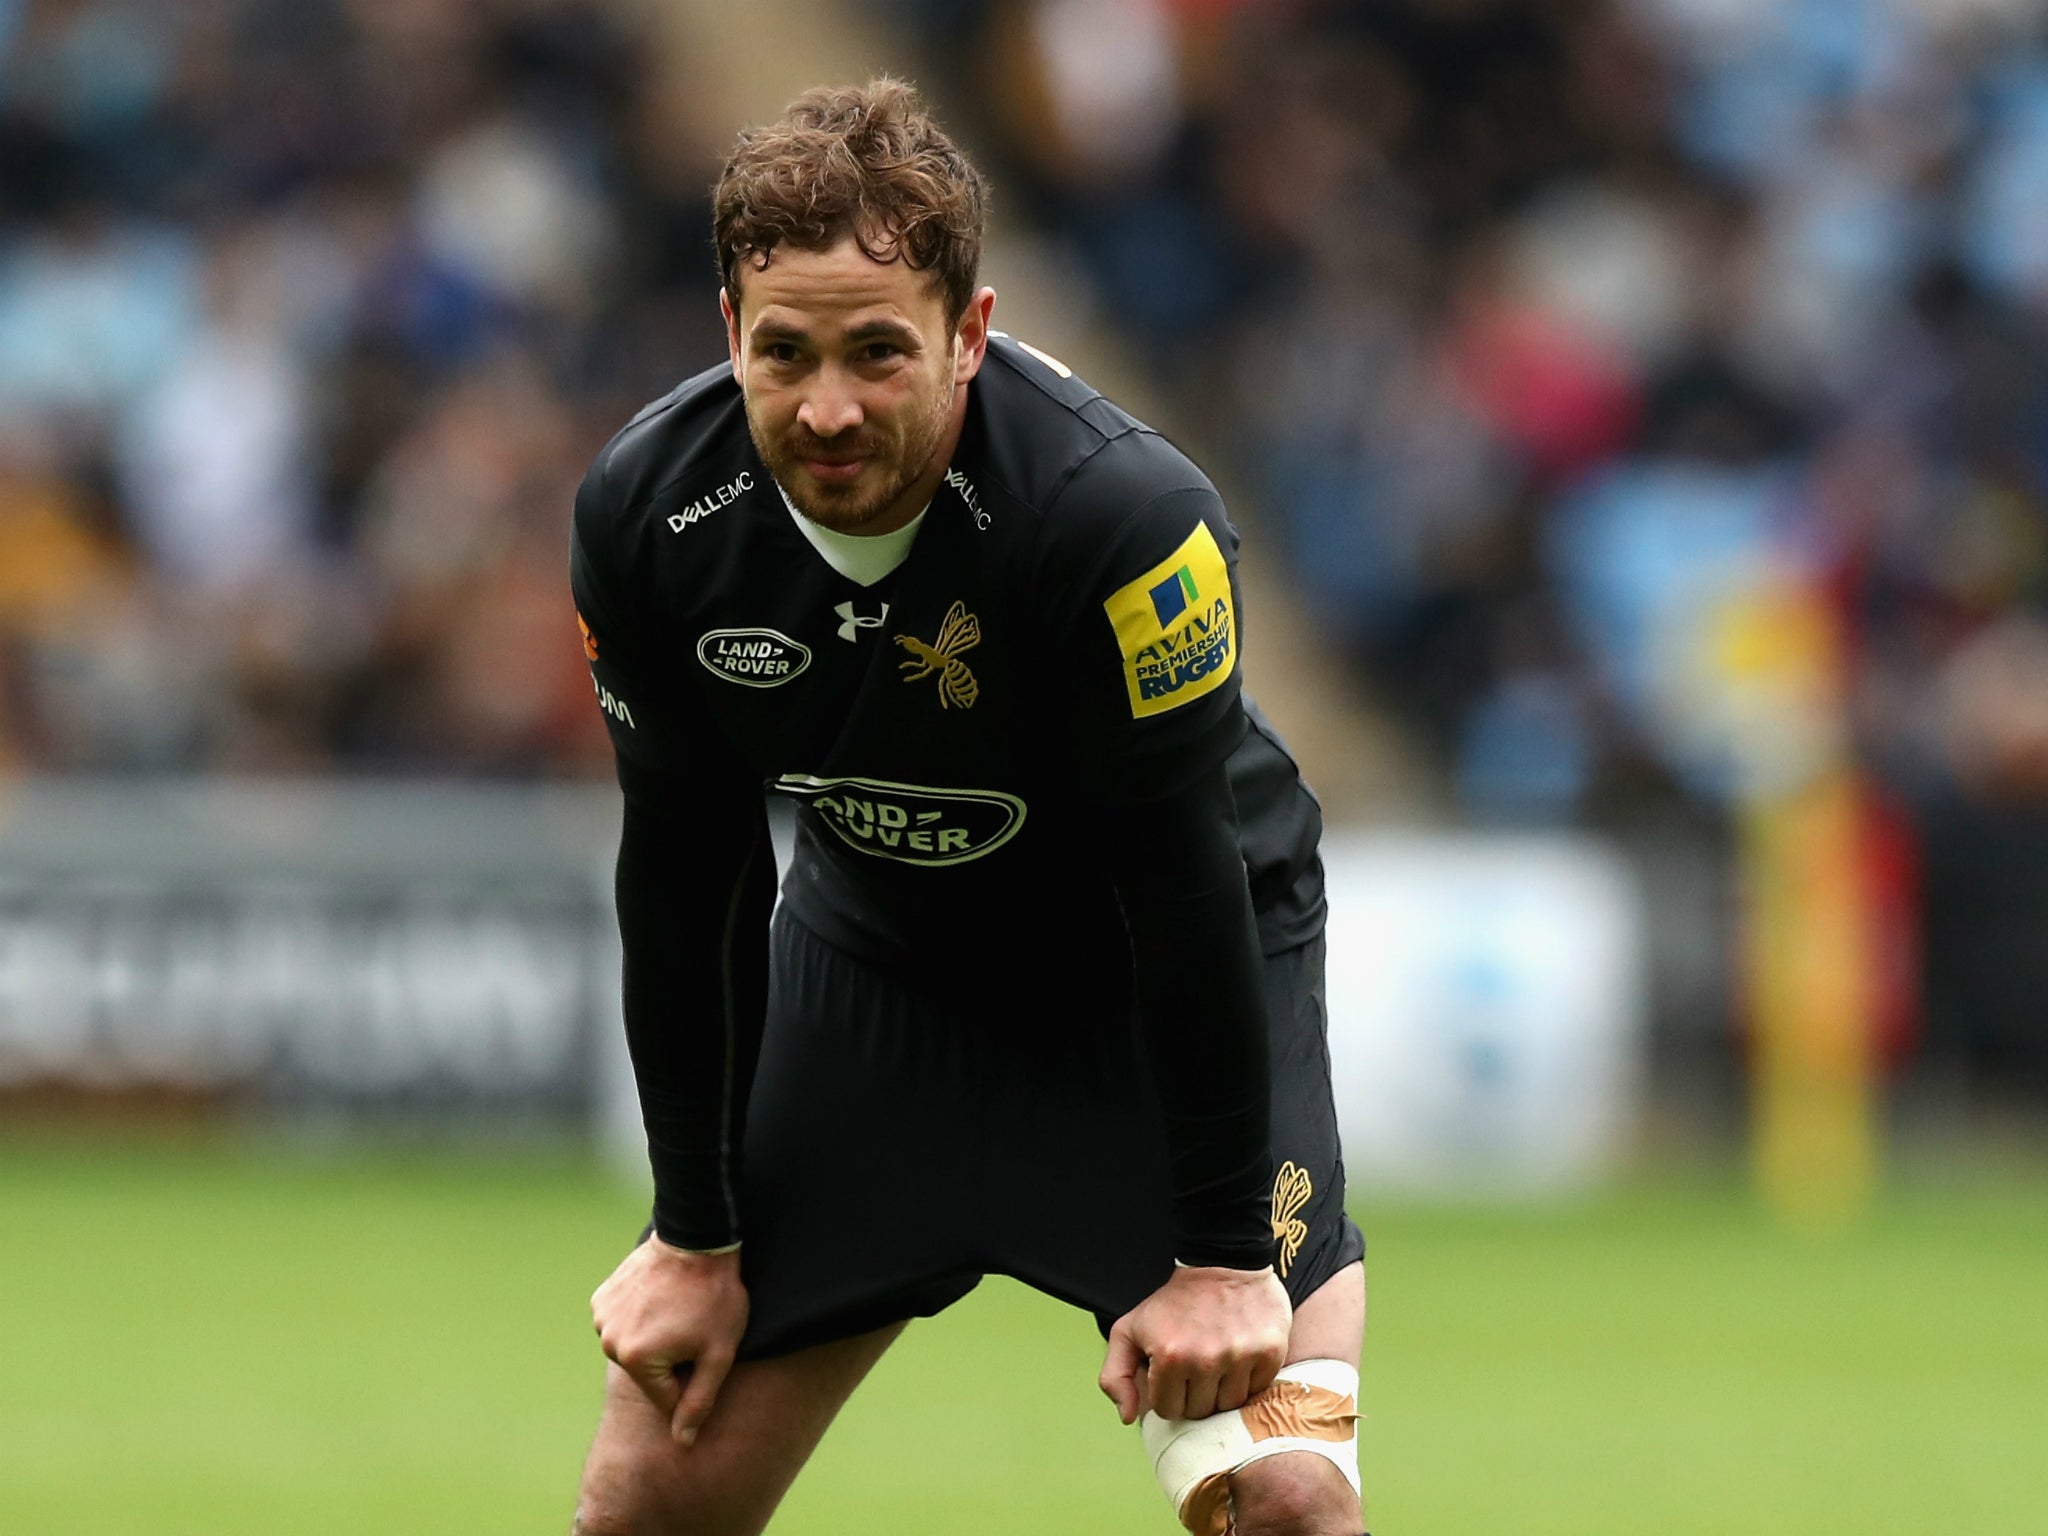 Danny Cipriani will join Gloucester next season when he leaves Wasps